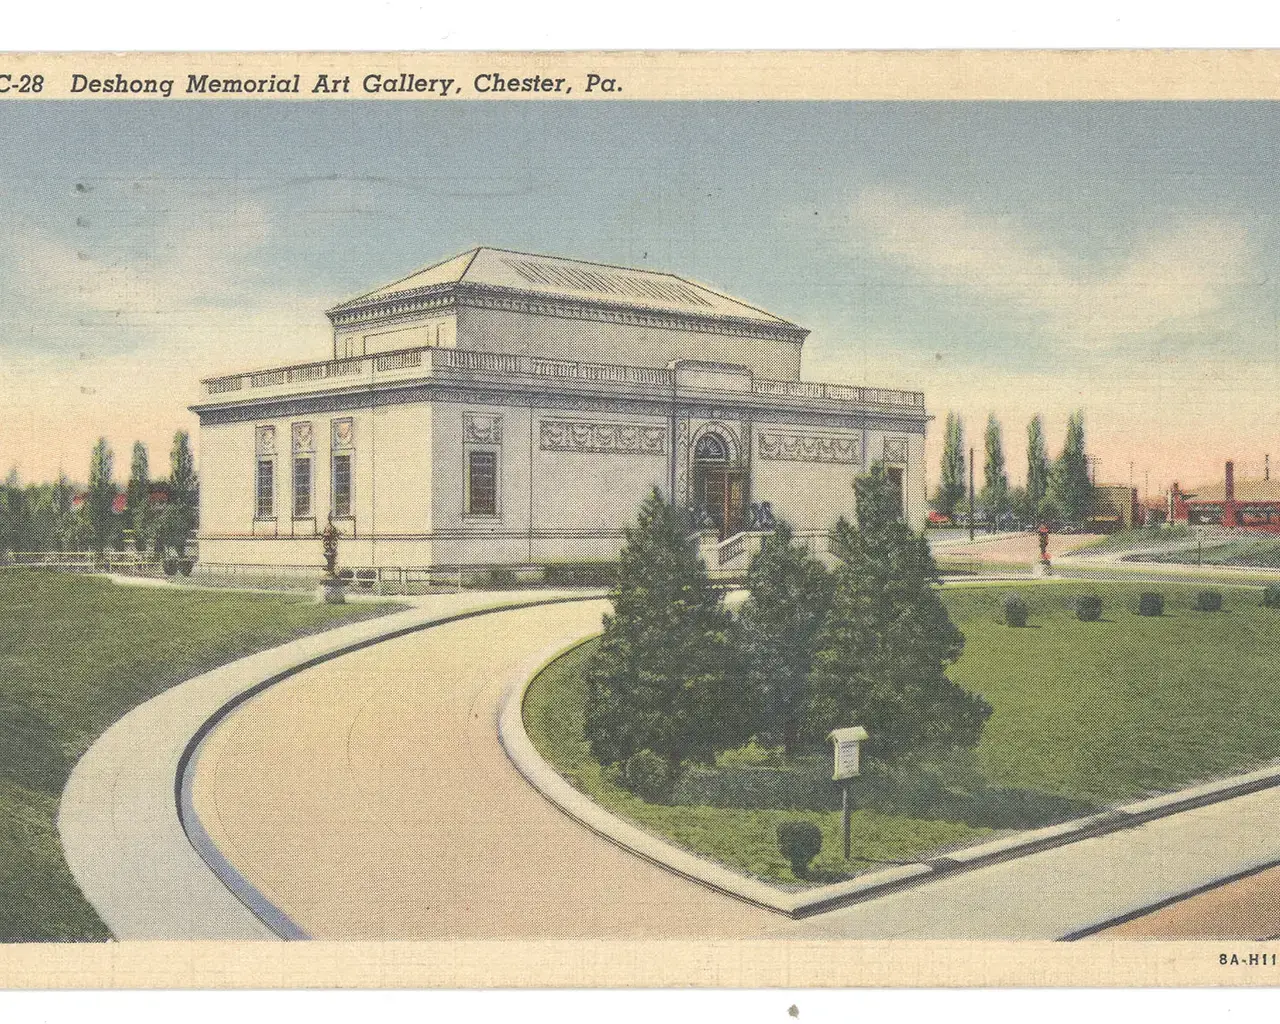 Historical postcard image of Deshong Museum. Photo courtesy of the Pennsylvania Humanities Council.